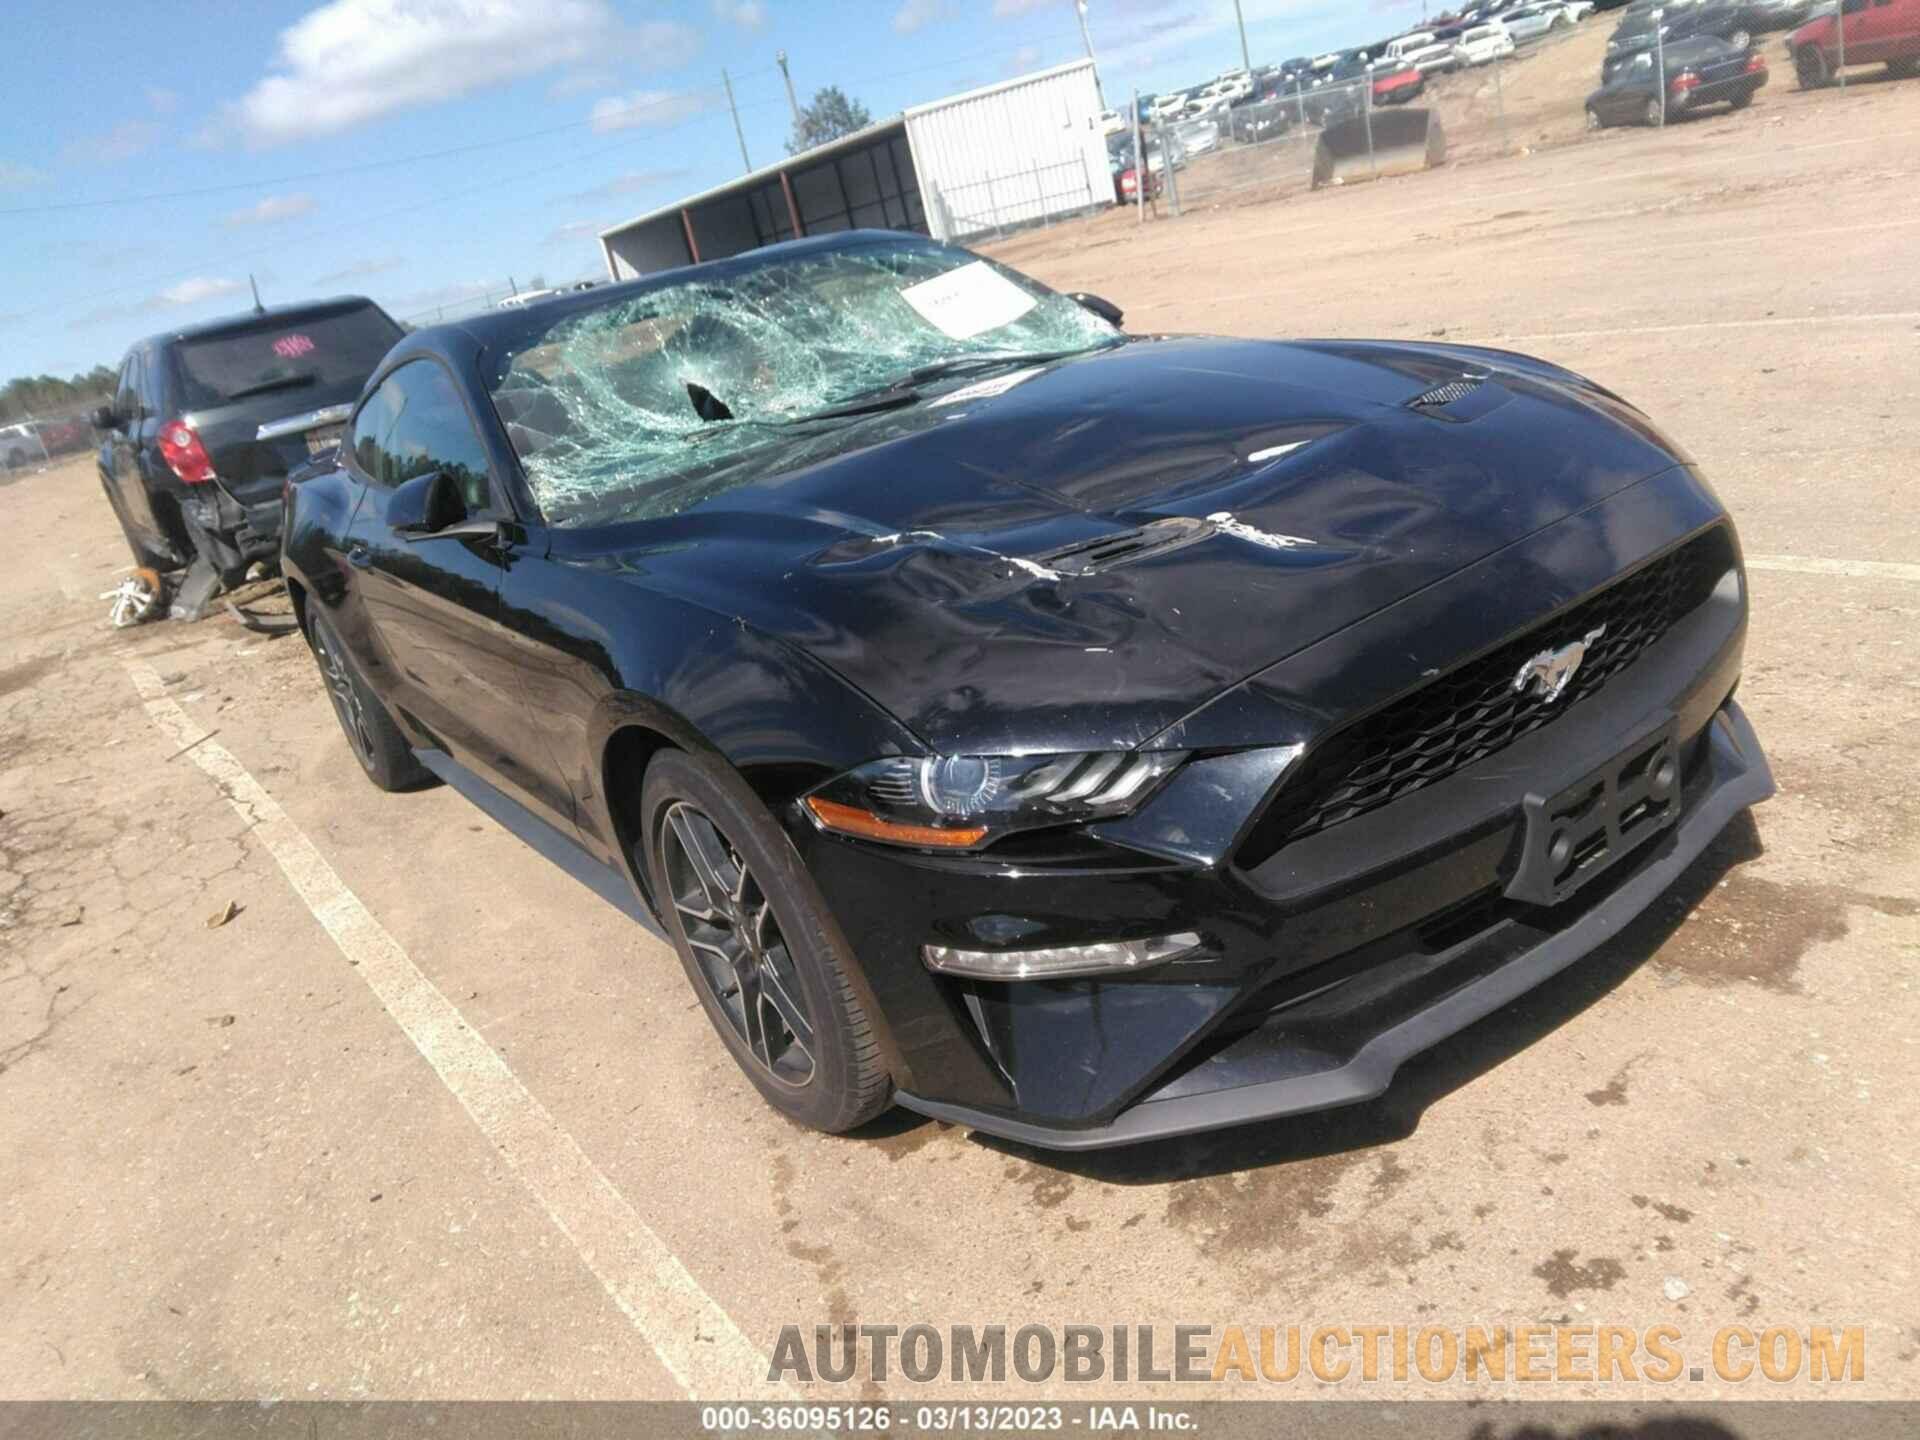 1FA6P8TH0J5167877 FORD MUSTANG 2018